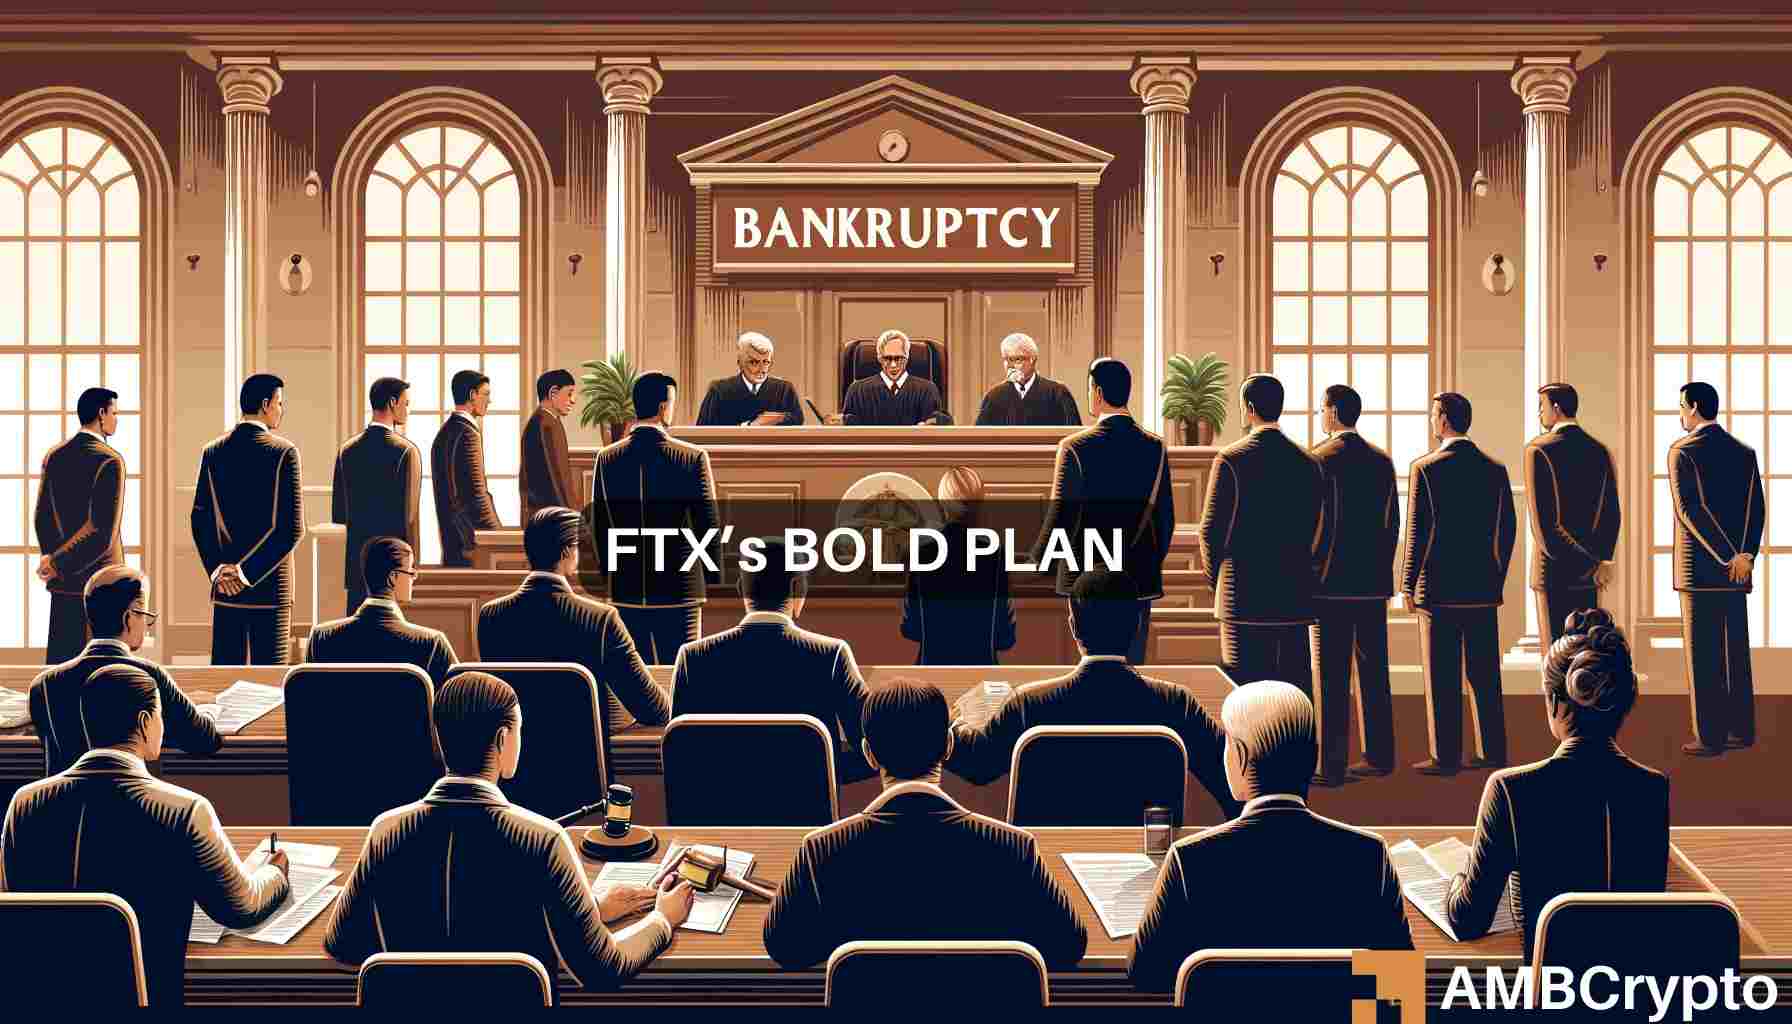 FTX's bold plan: 'Creditors to receive 100% claims,' CEO reveals